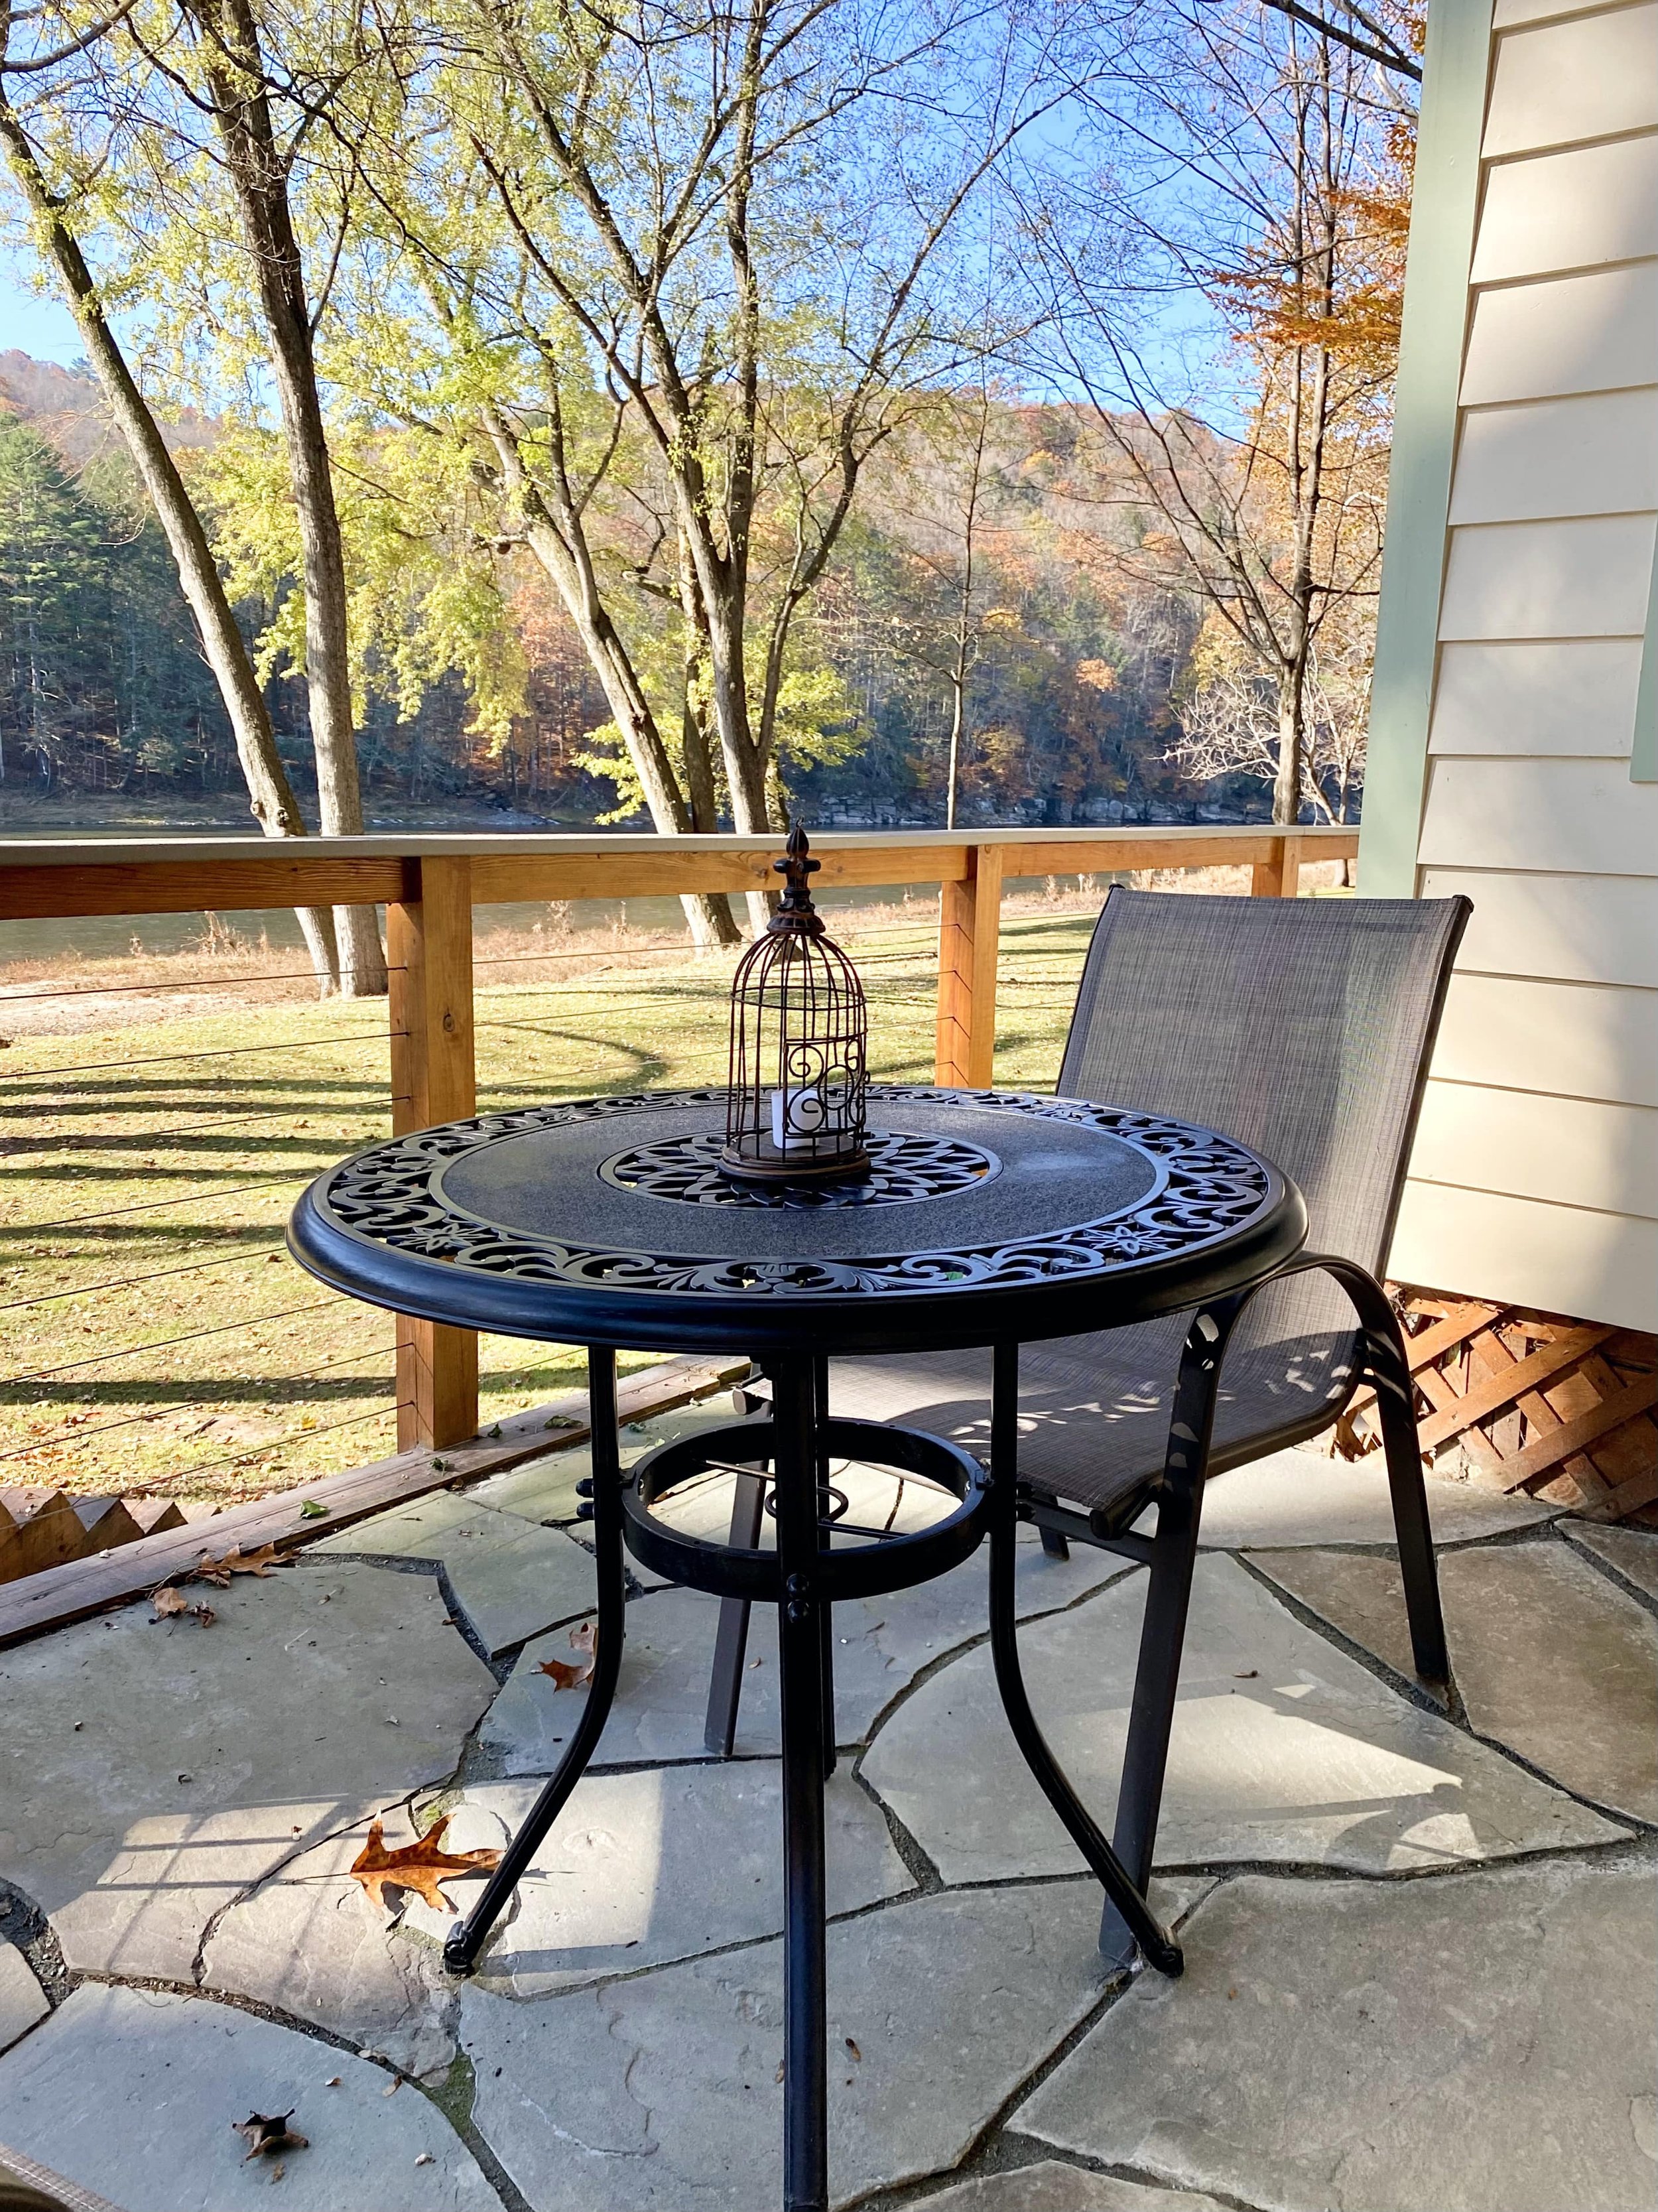 Outdoor Patio Table_Mission Possible Airbnb_NarrowsburgNY.JPG